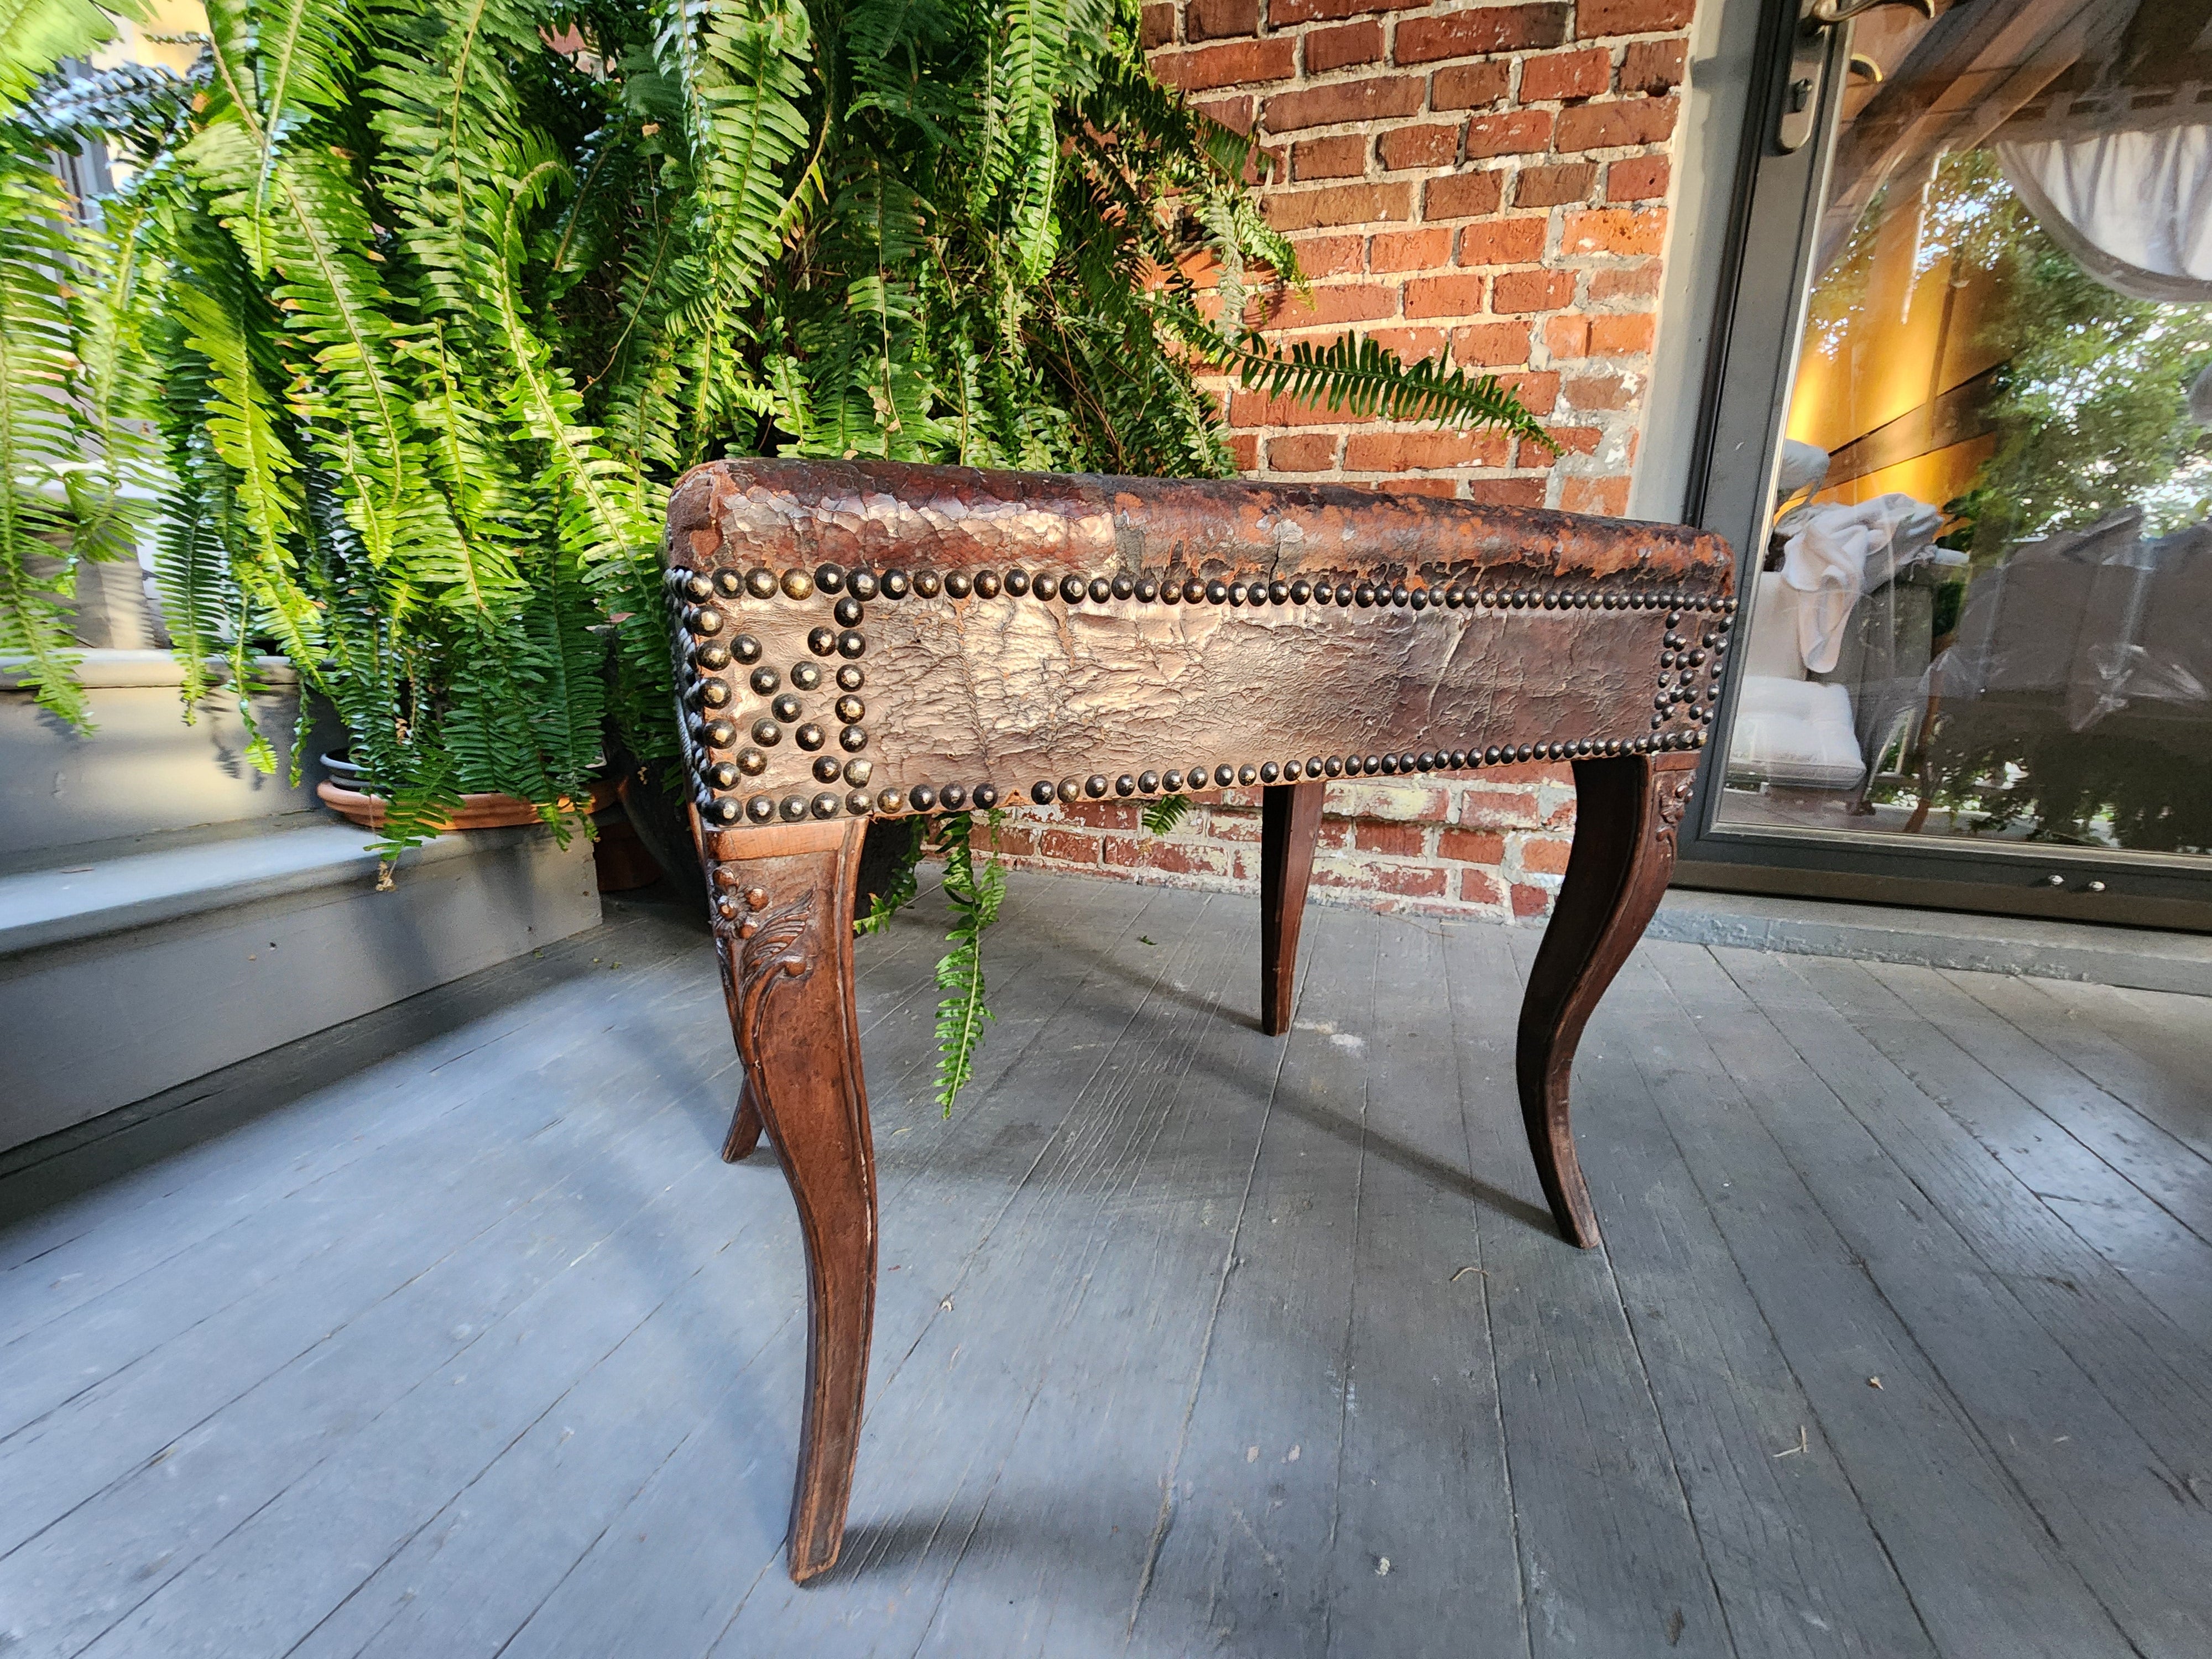 Rare, Louis XV carved walnut bench with original finish and original leather upholstery. Such a wonderful state of preservation, yet strong and ready to be used.
Please contact me with the delivery address for this item to see if I can facilitate a